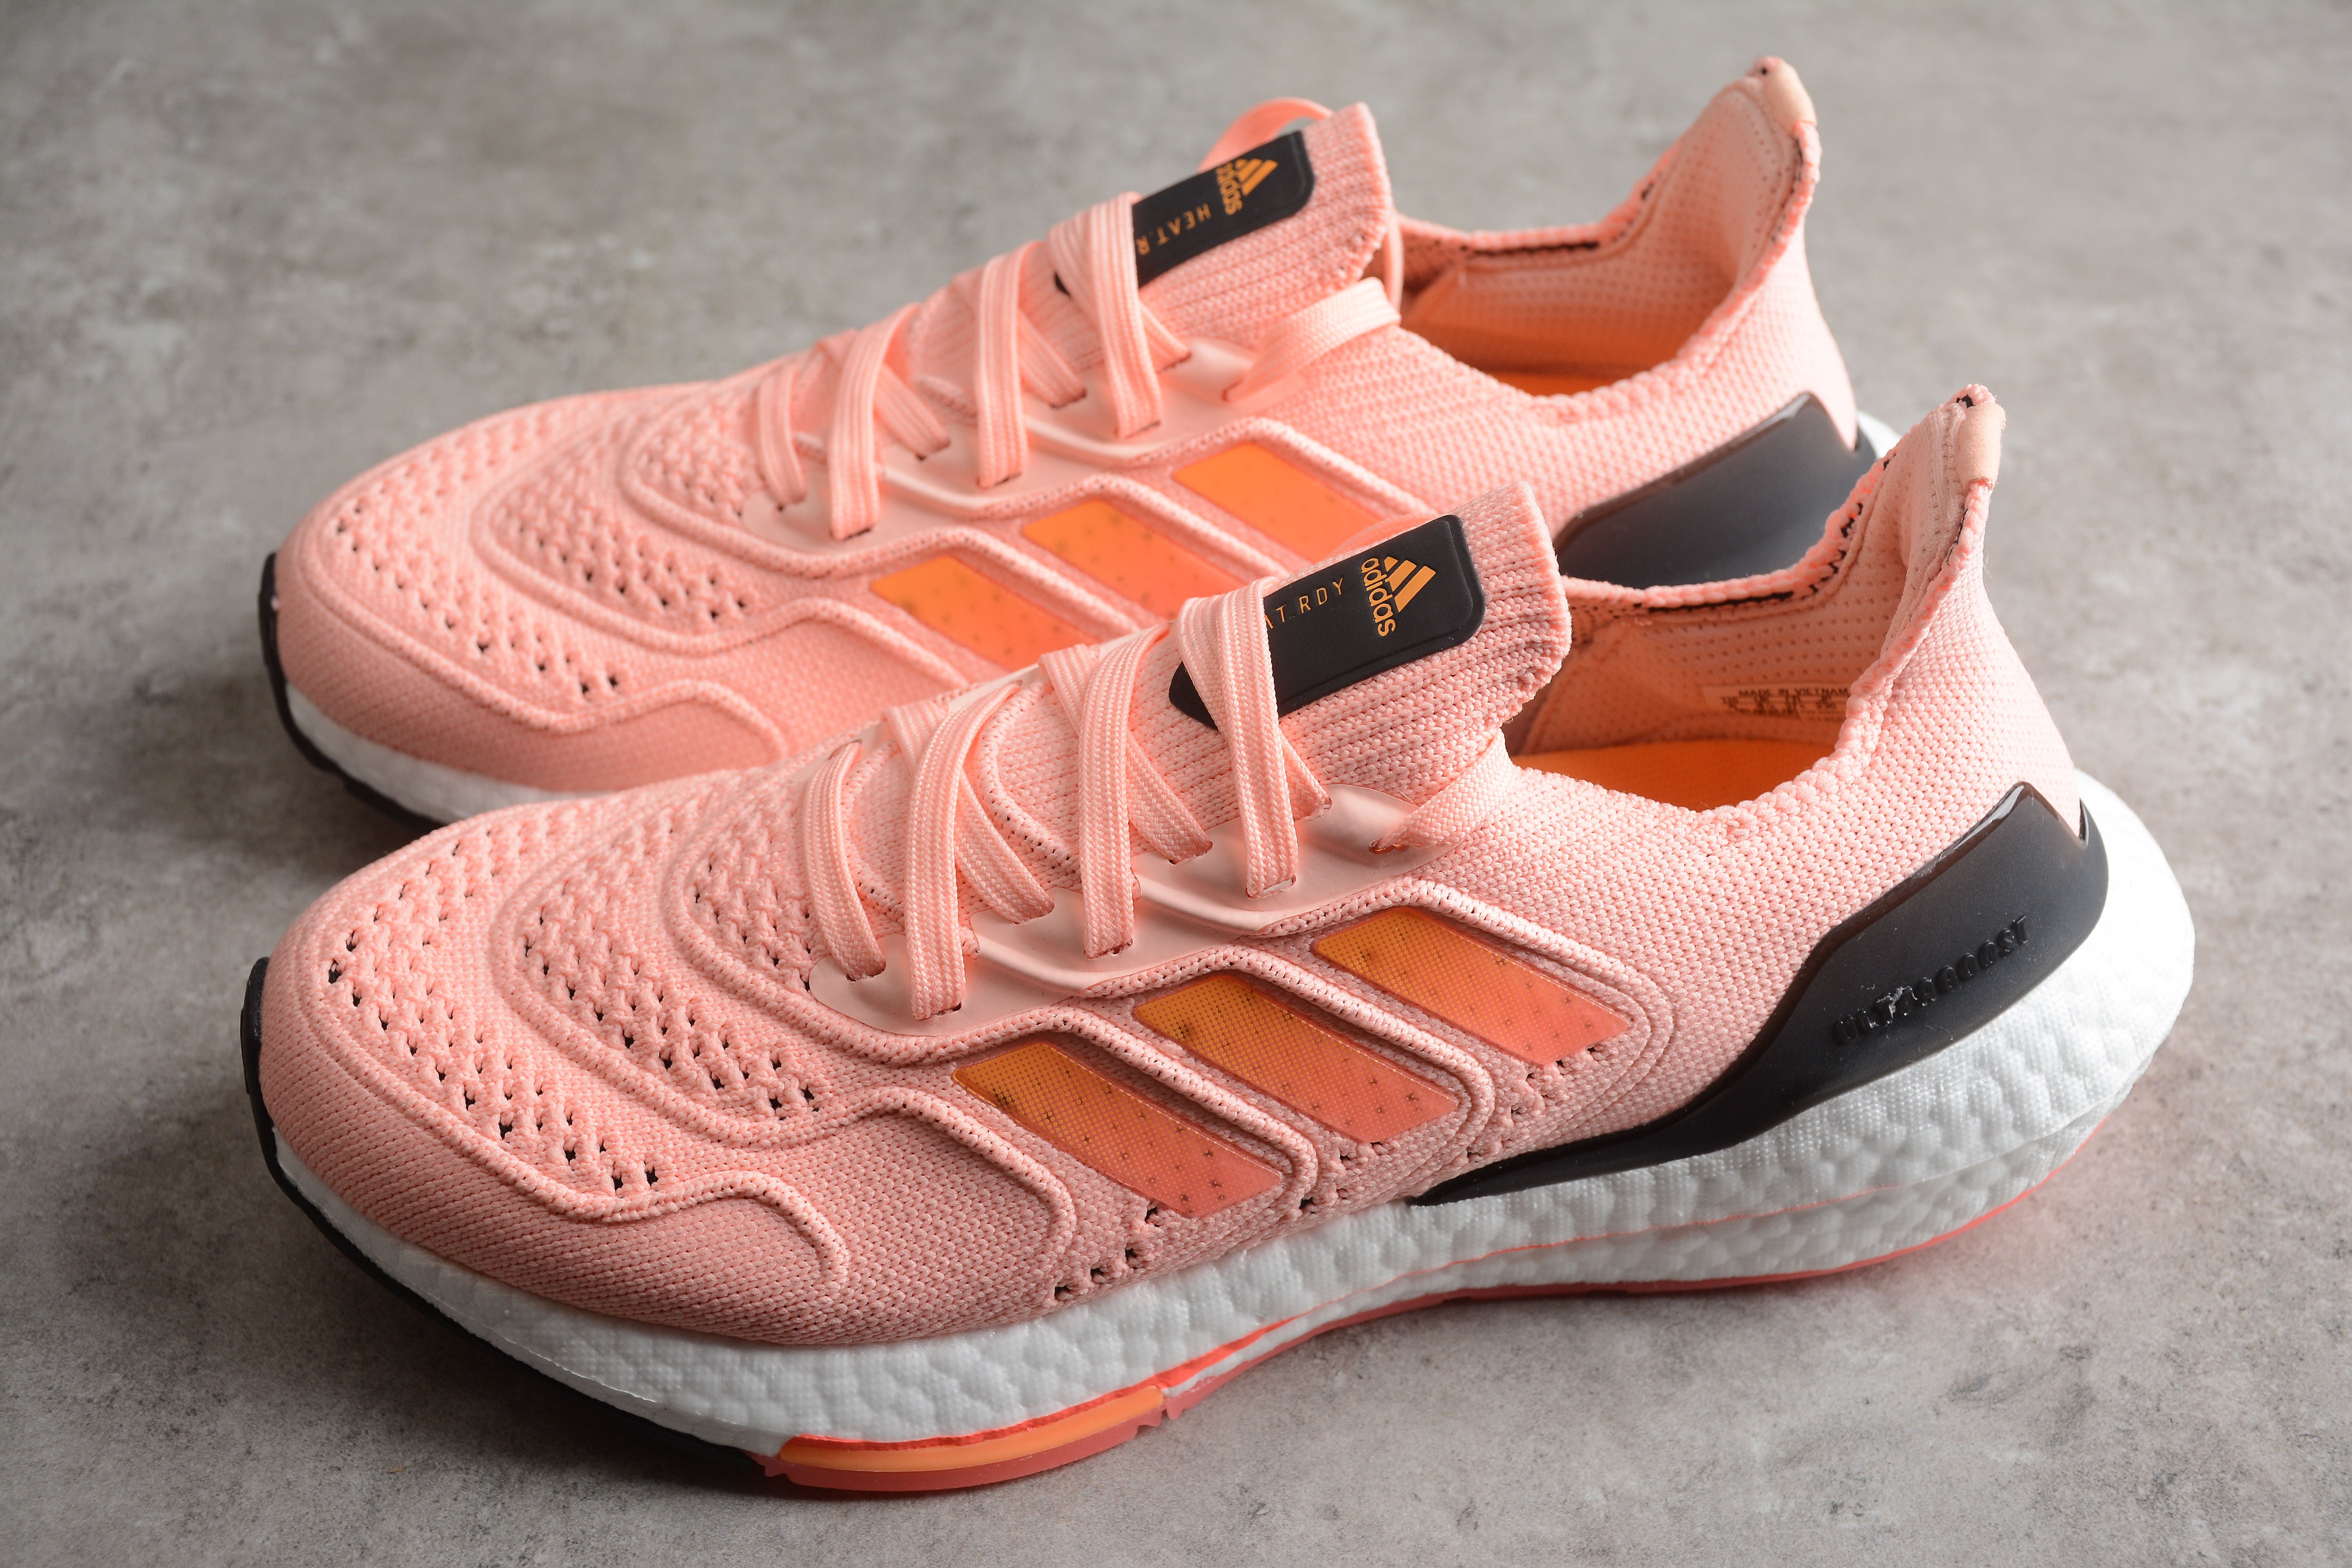 Adidas ultraboost pink shoes